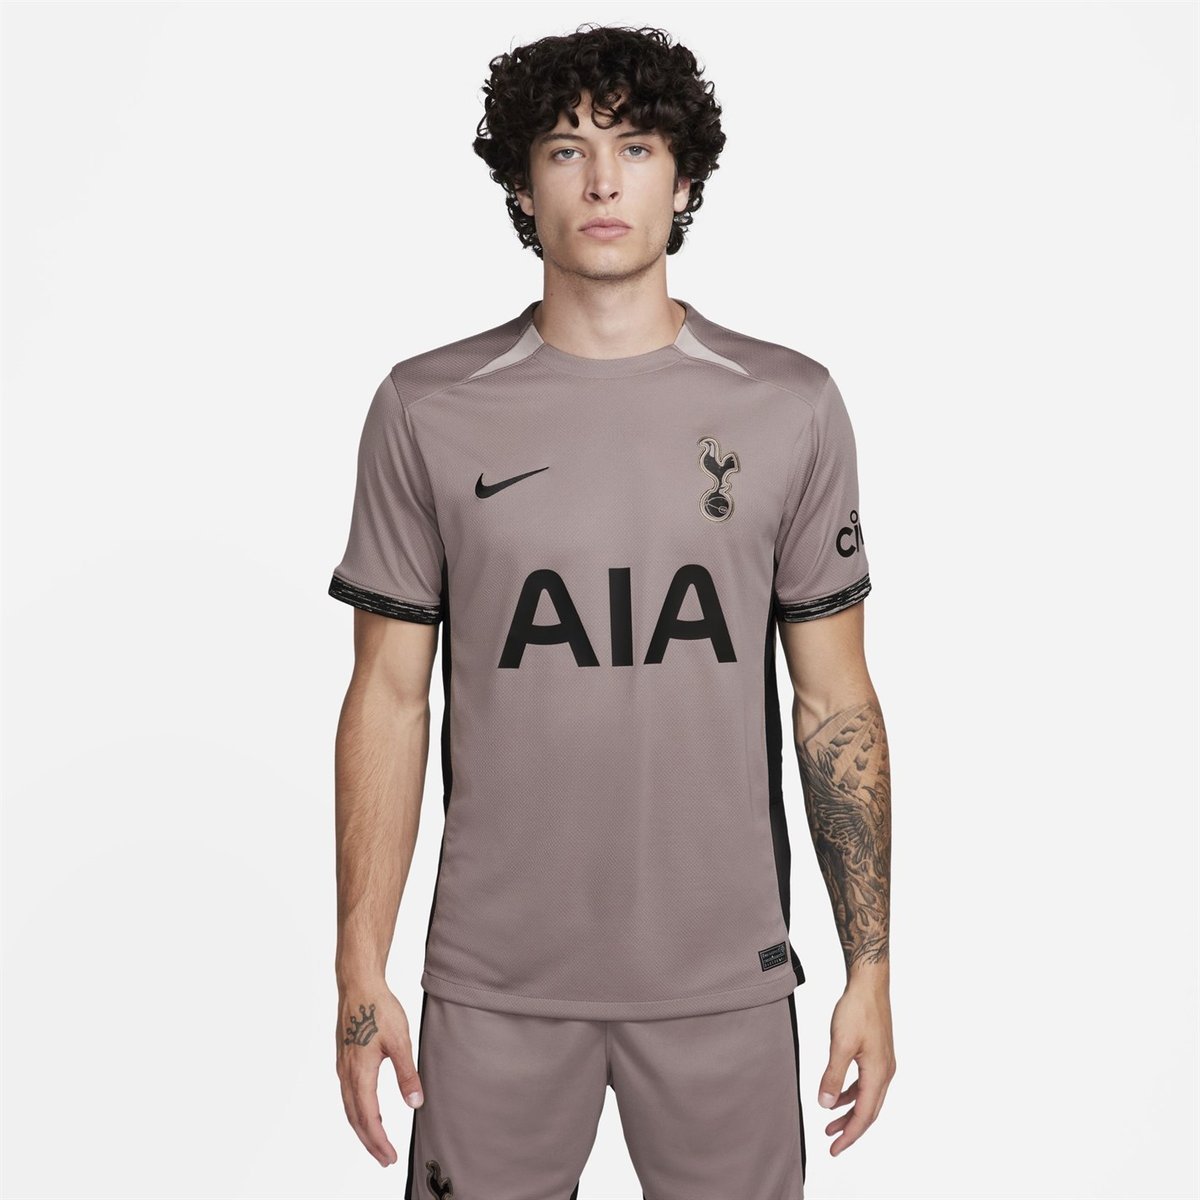 New Tottenham Jersey 2022-2023  Spurs Home Kit 22-23 by Nike